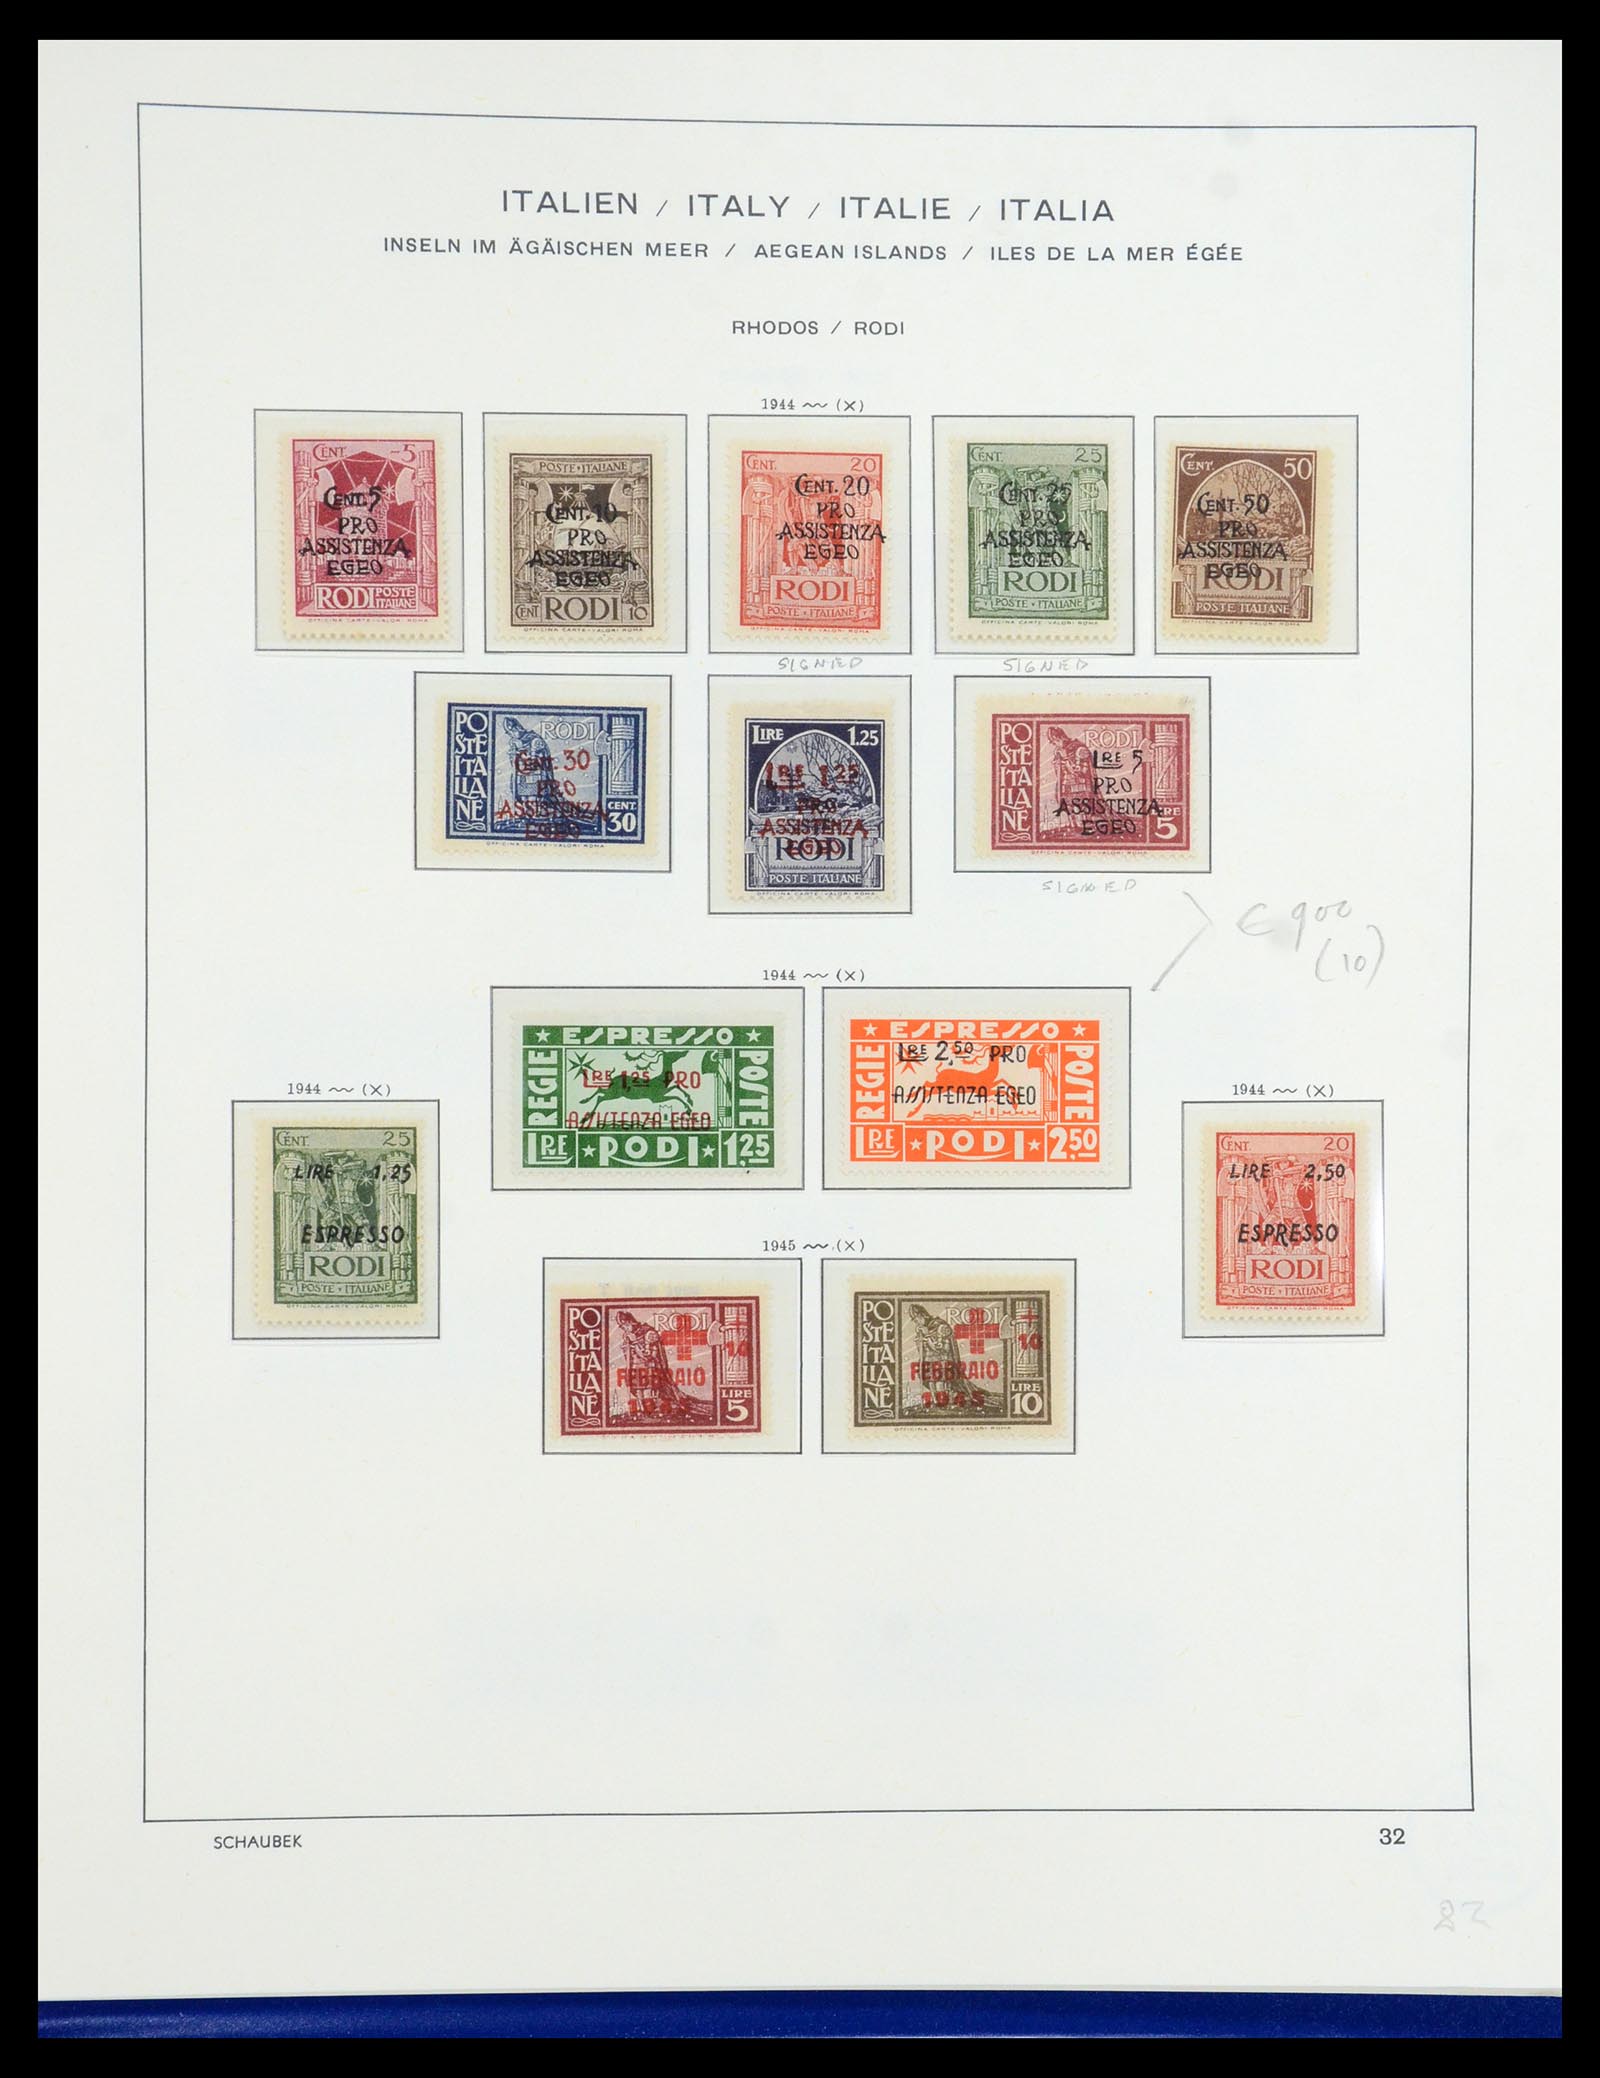 36181 045 - Stamp collection 36181 Italian Aegean Islands 1912-1941.